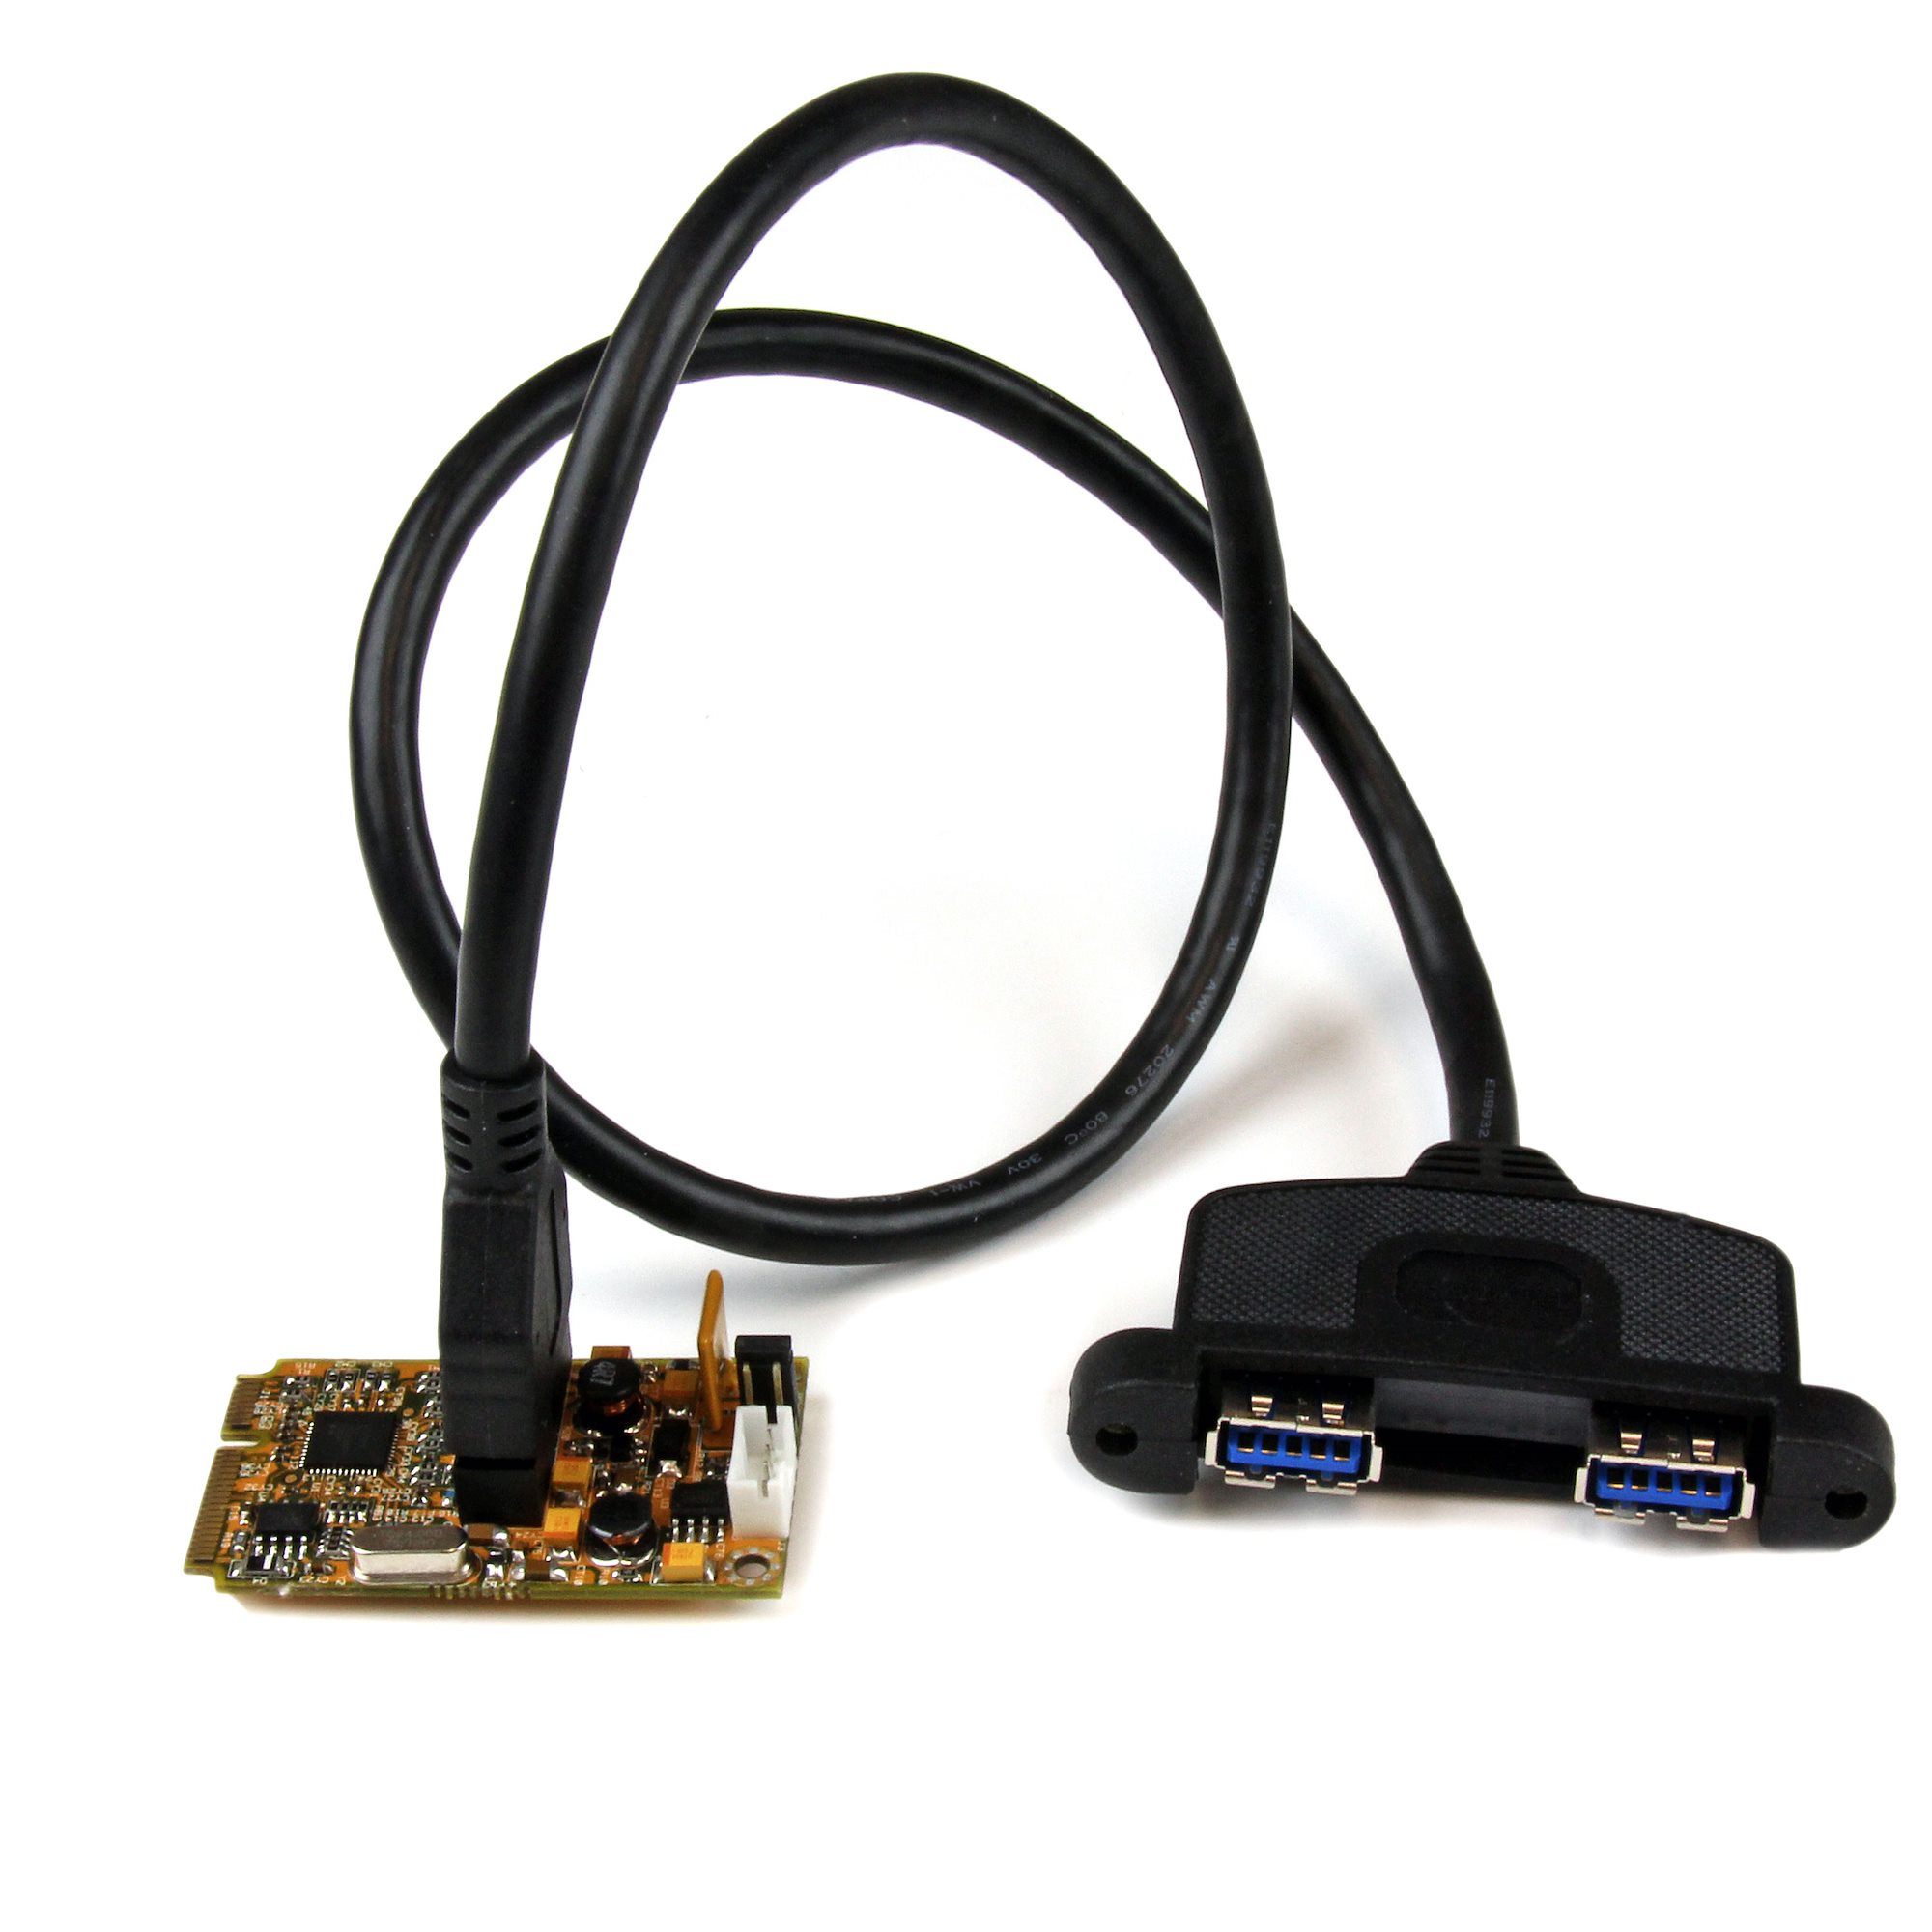 2 Port SuperSpeed (5Gbps) Mini PCI Express USB 3.0 Adapter Card w/ Bracket  Kit and UASP Support